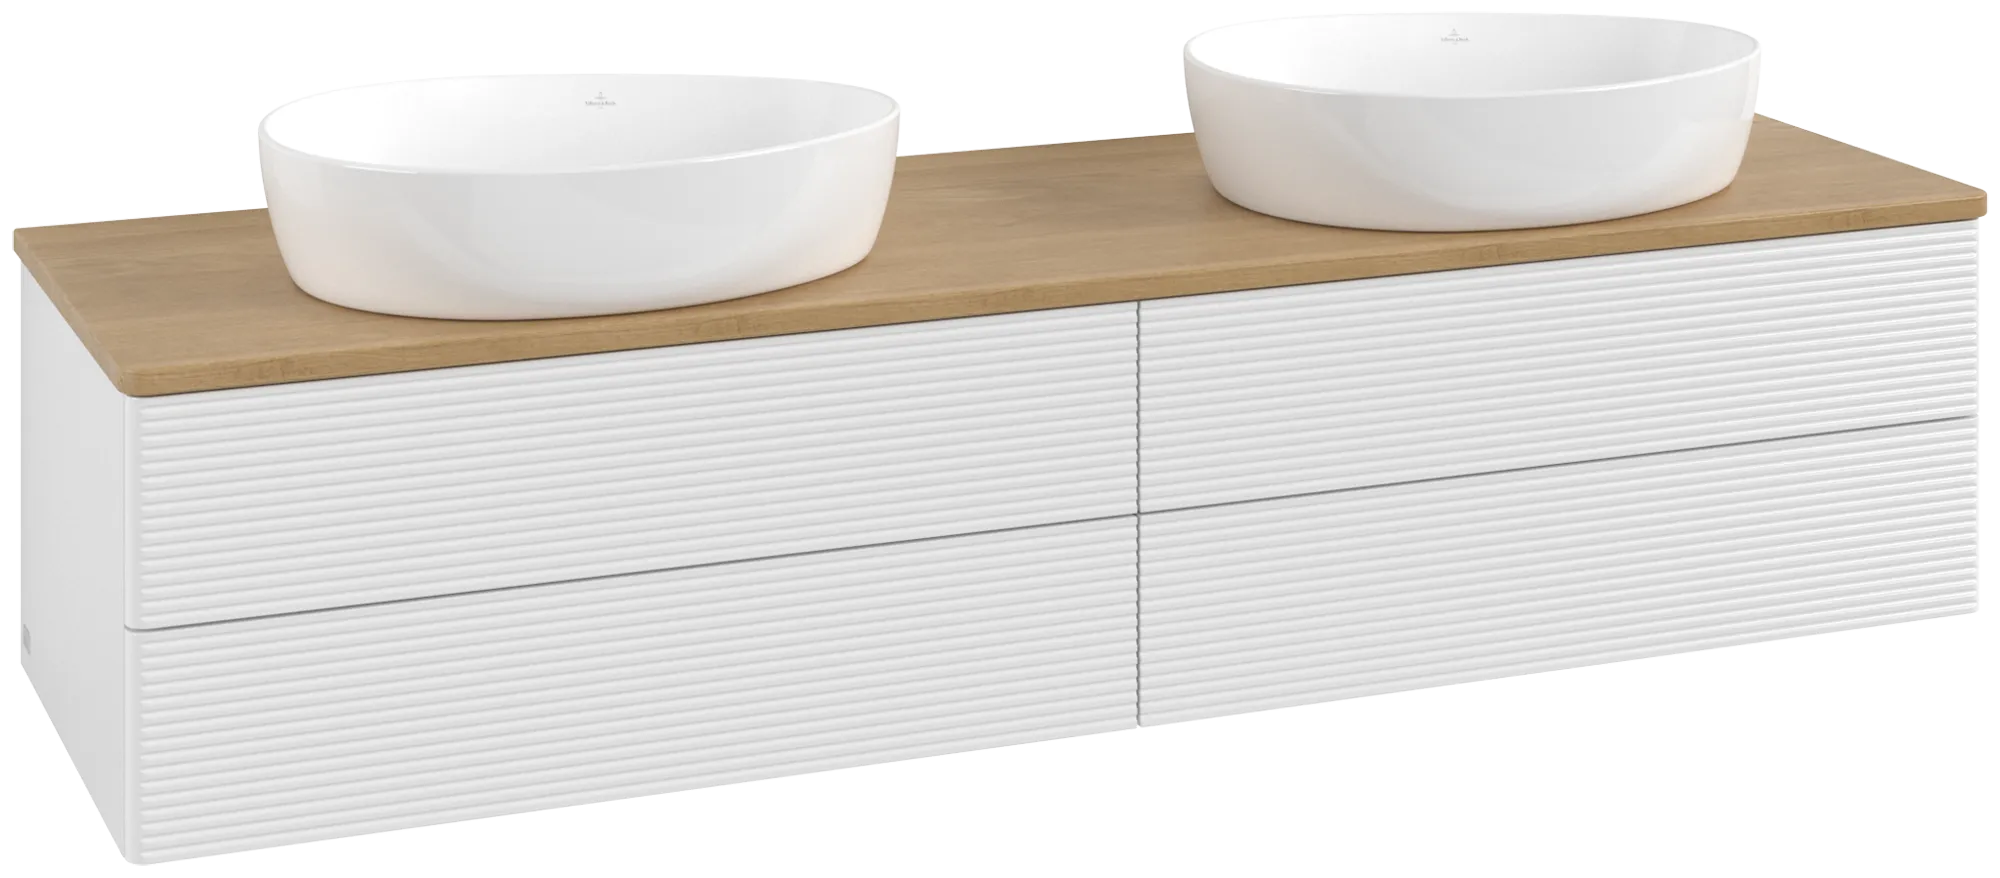 Picture of VILLEROY BOCH Antao Vanity unit, with lighting, 4 pull-out compartments, 1600 x 360 x 500 mm, Front with grain texture, Glossy White Lacquer / Honey Oak #L28111GF